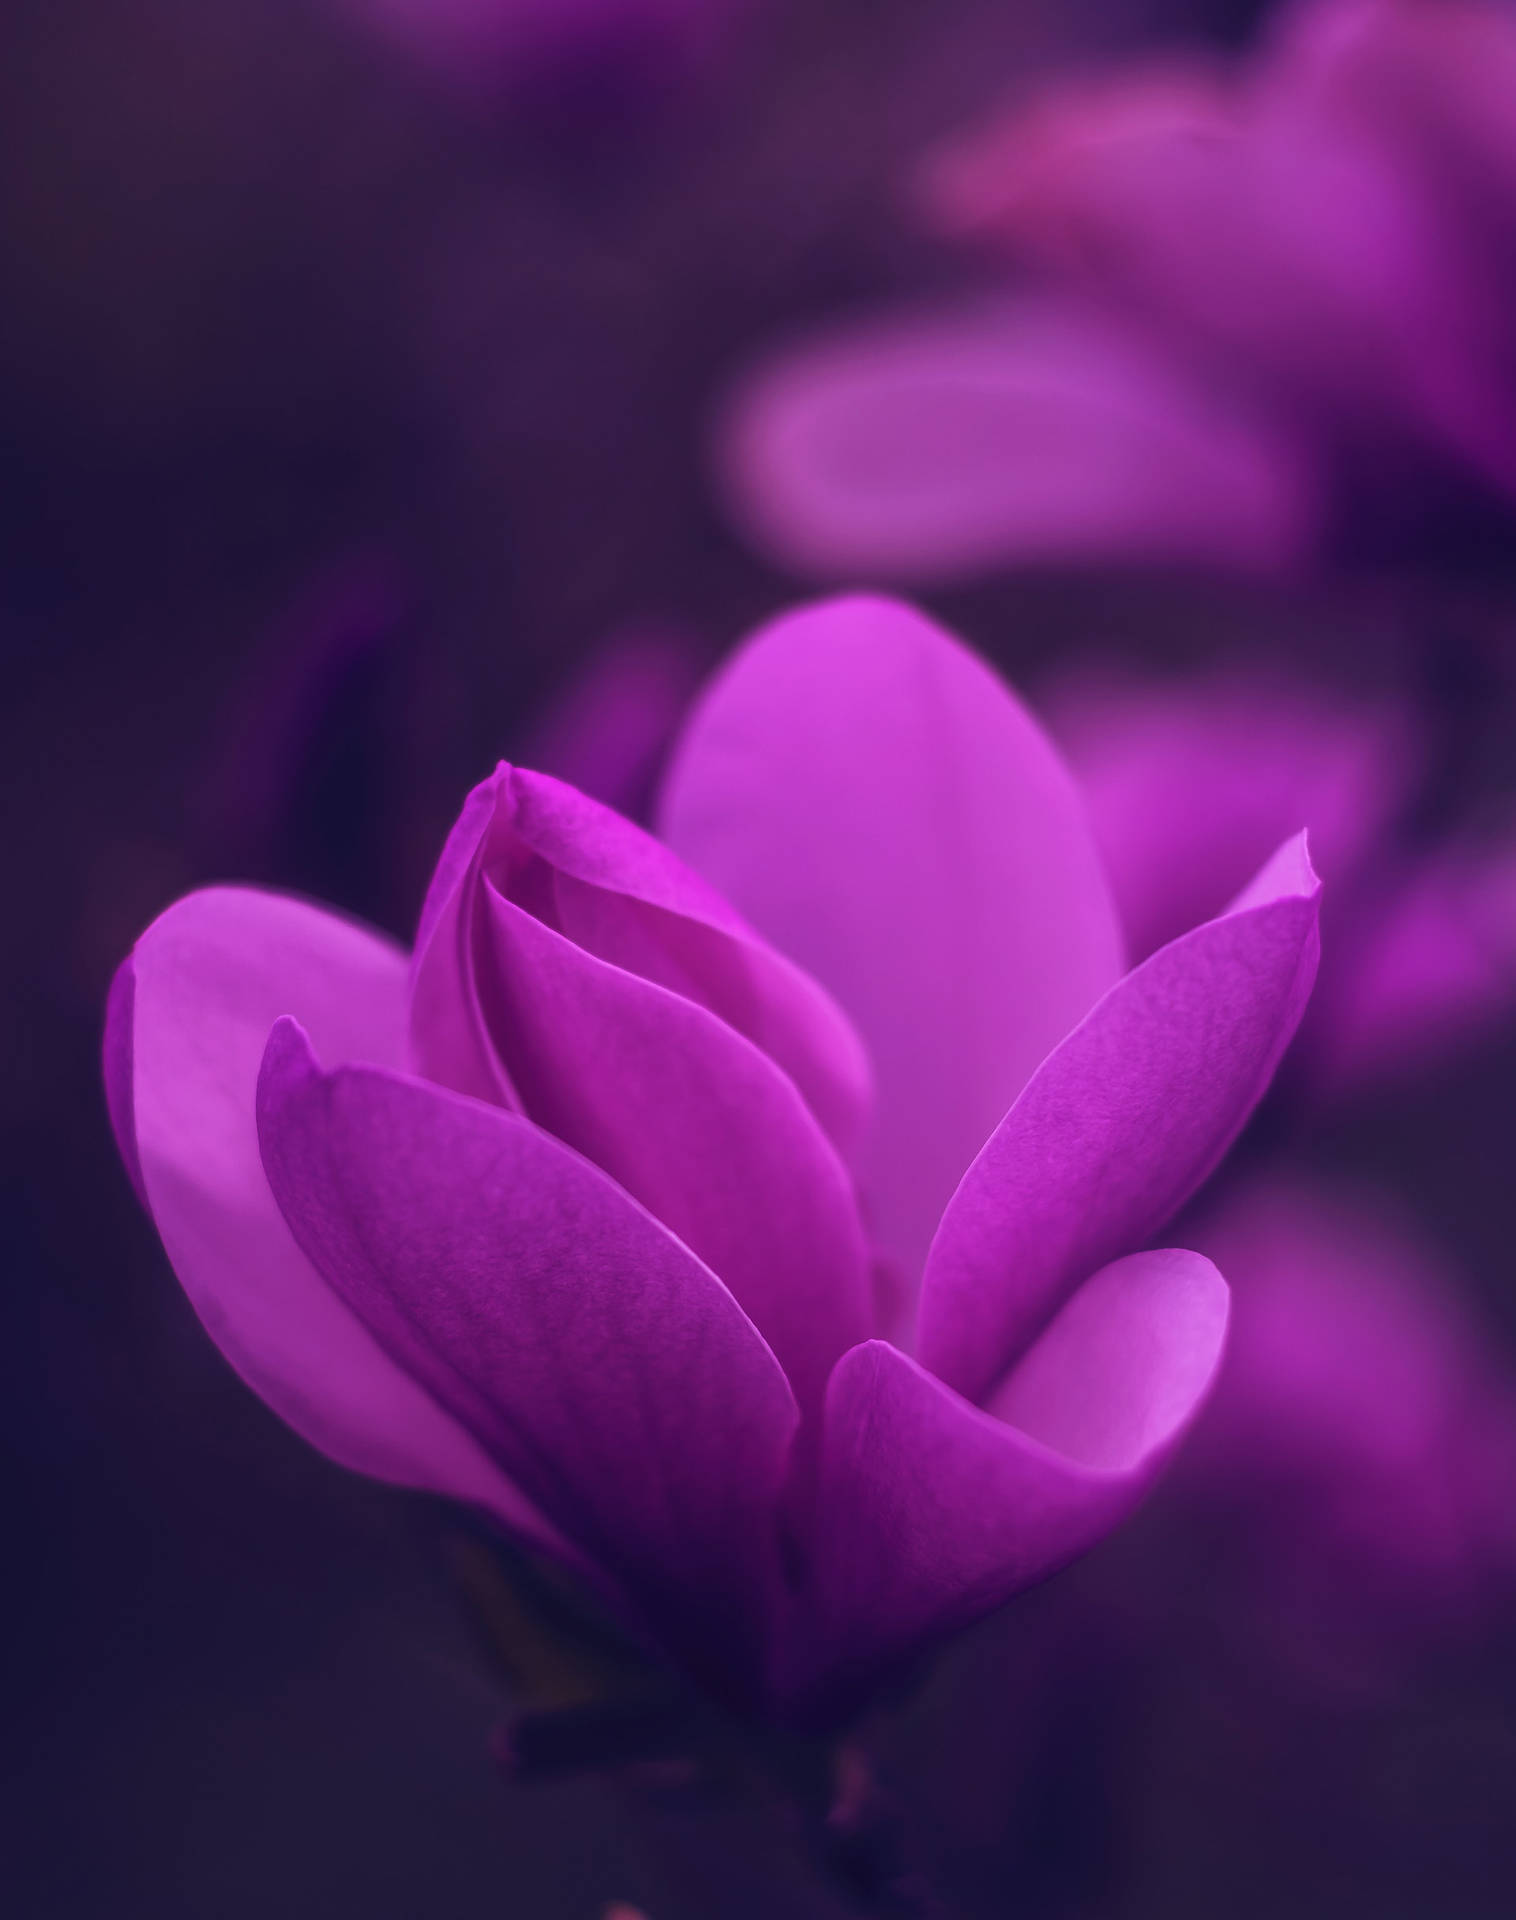 Cyclamen Persicum Flower Android